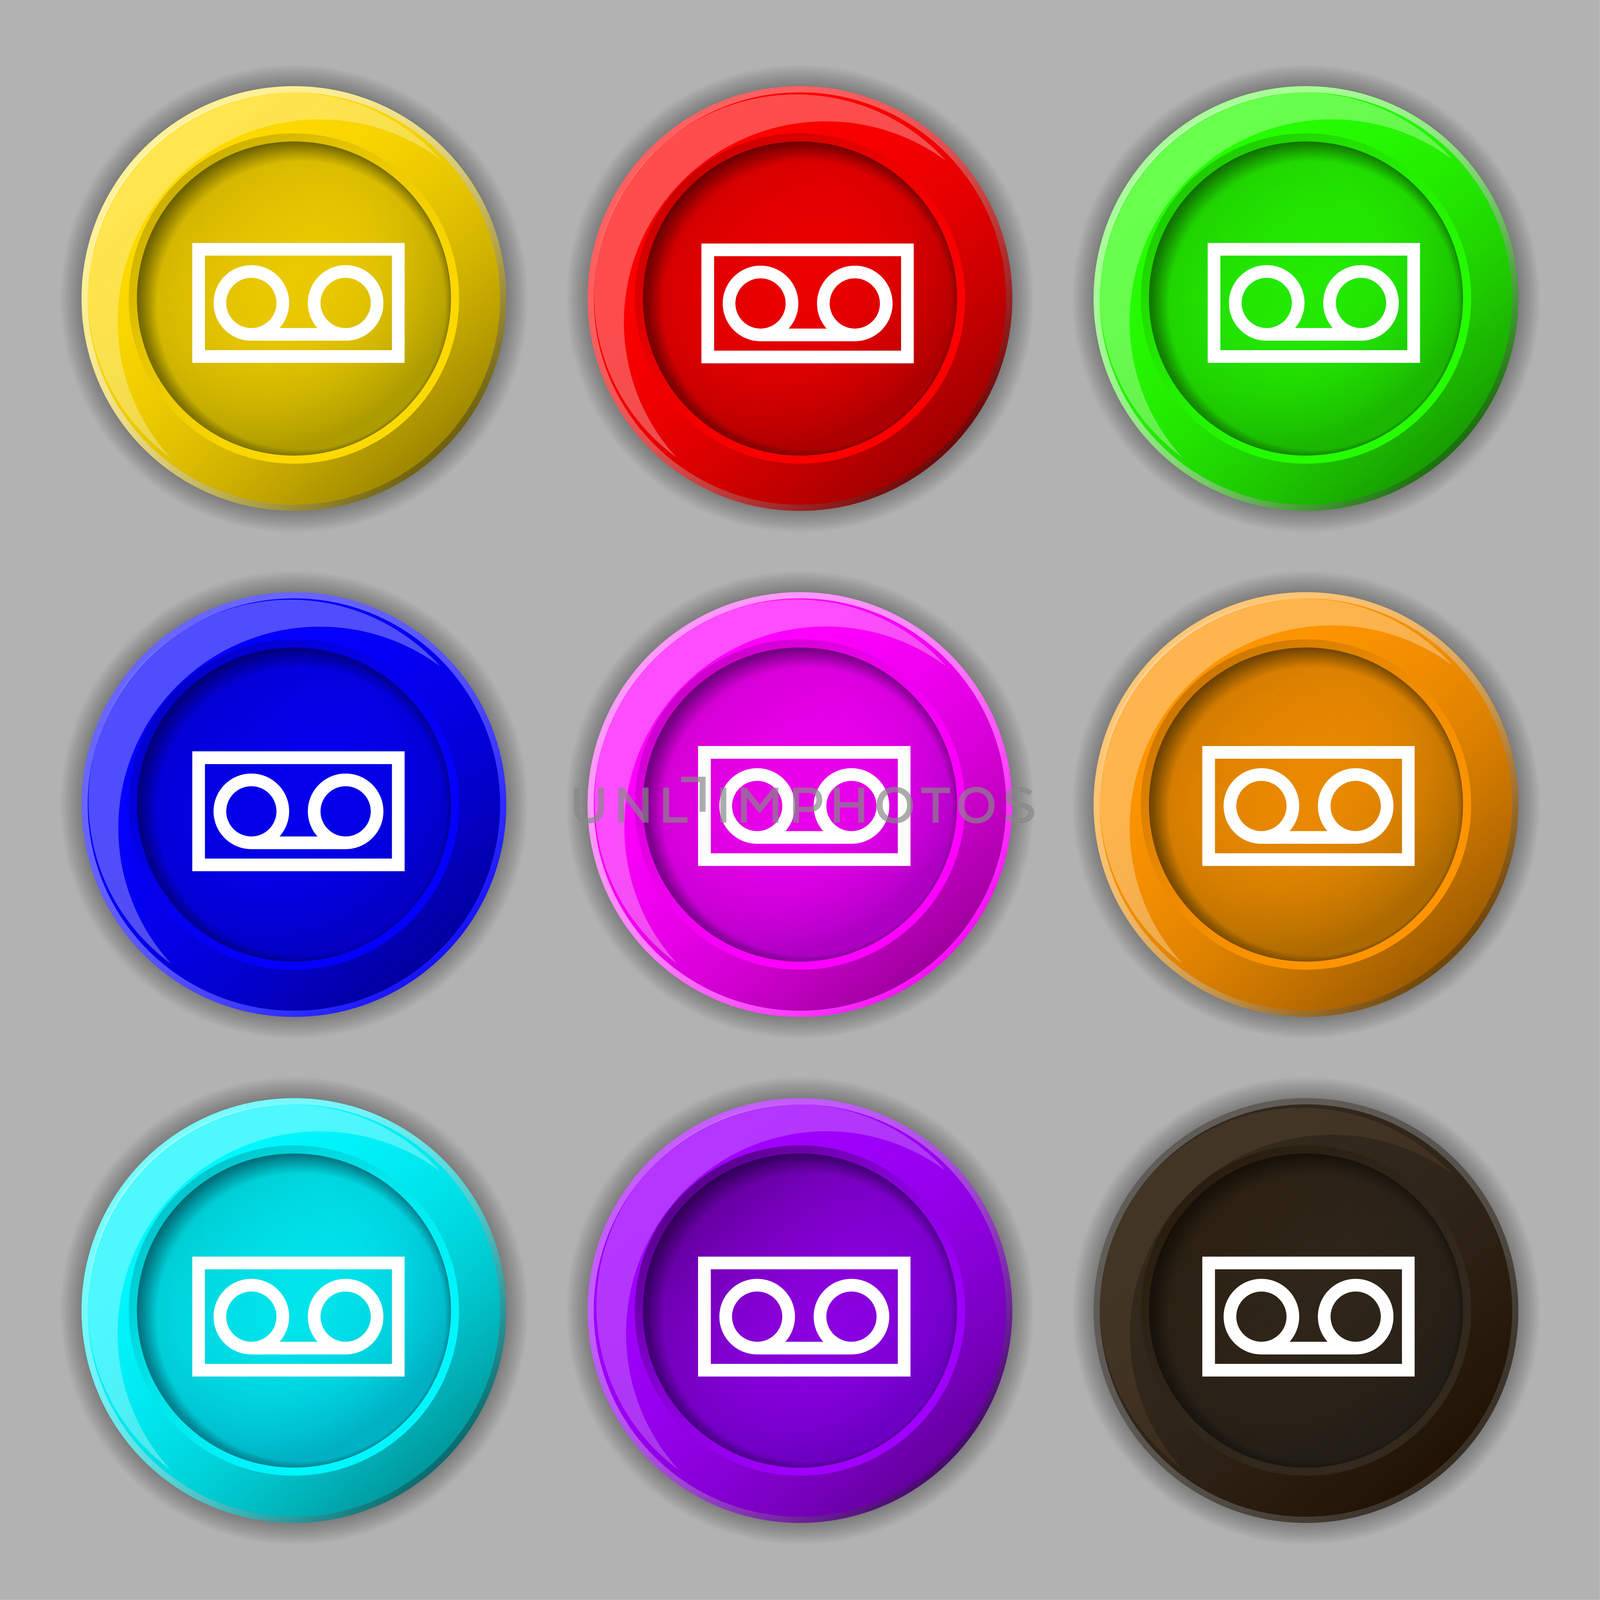 audio cassette icon sign. symbol on nine round colourful buttons. illustration